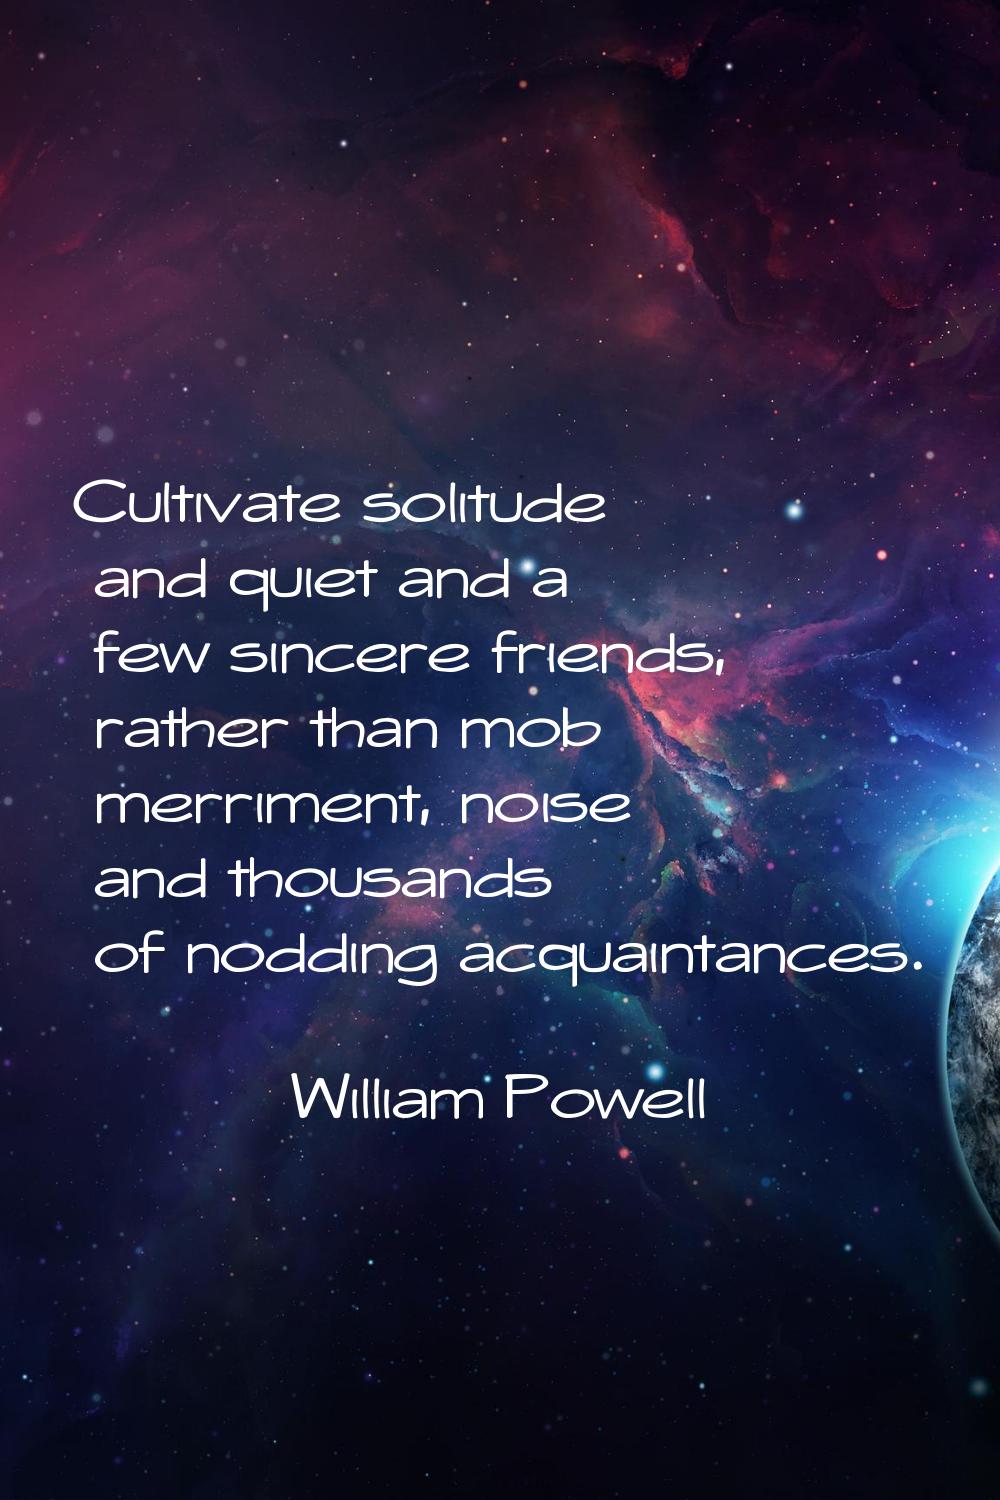 Cultivate solitude and quiet and a few sincere friends, rather than mob merriment, noise and thousa